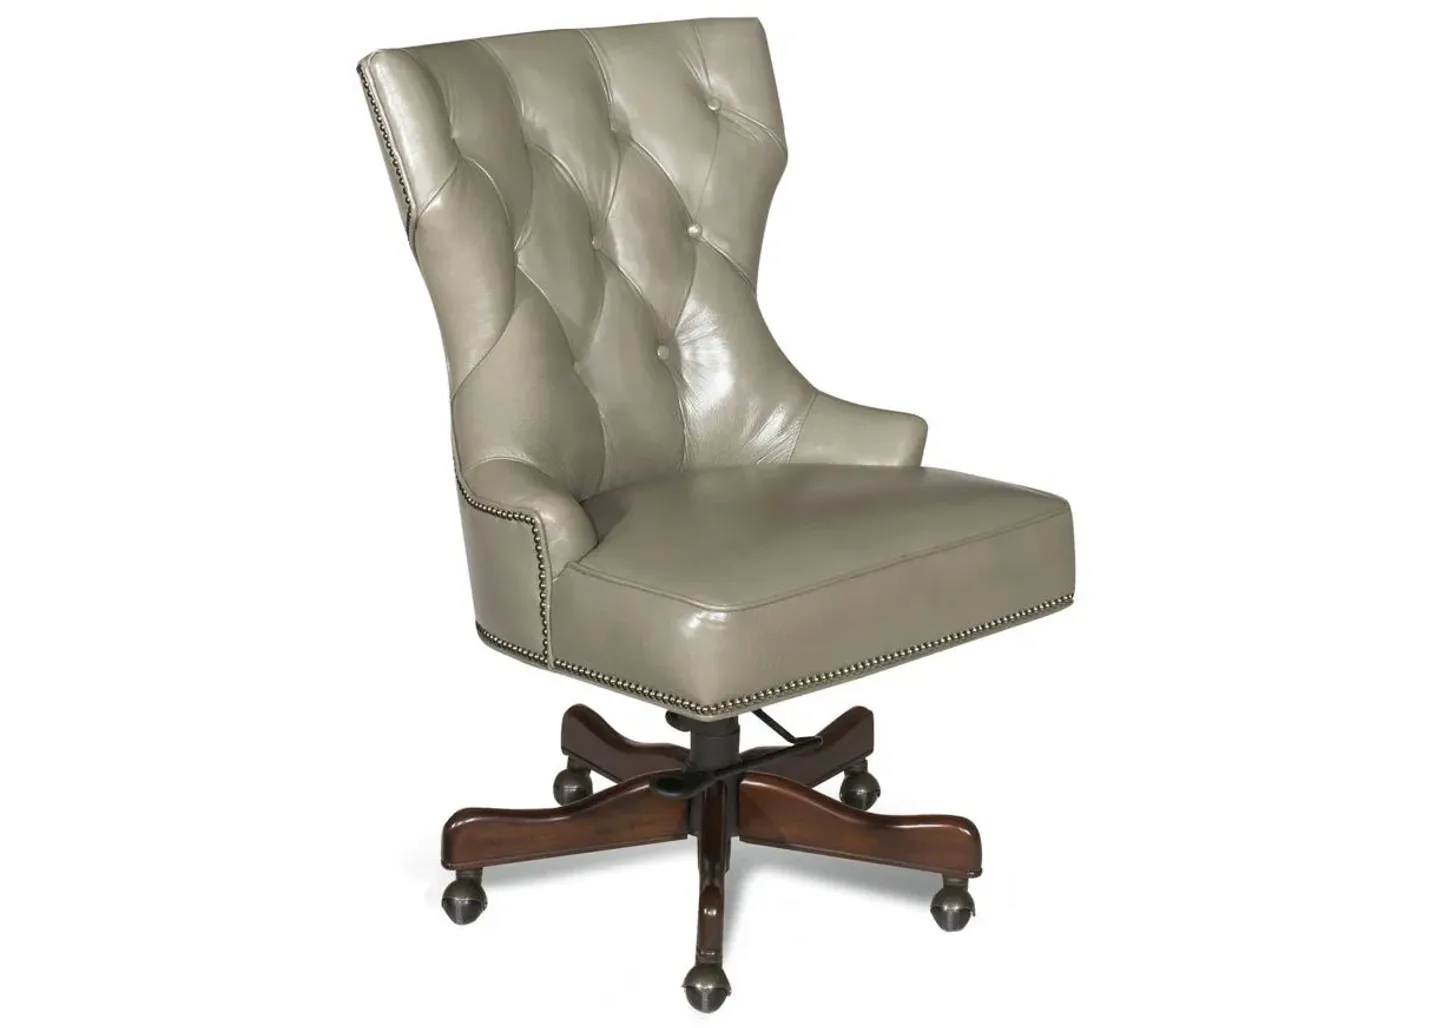 Hooker Furniture Corp. Primm Executive Swivel Tilt Chair in Grey by Hooker Furniture